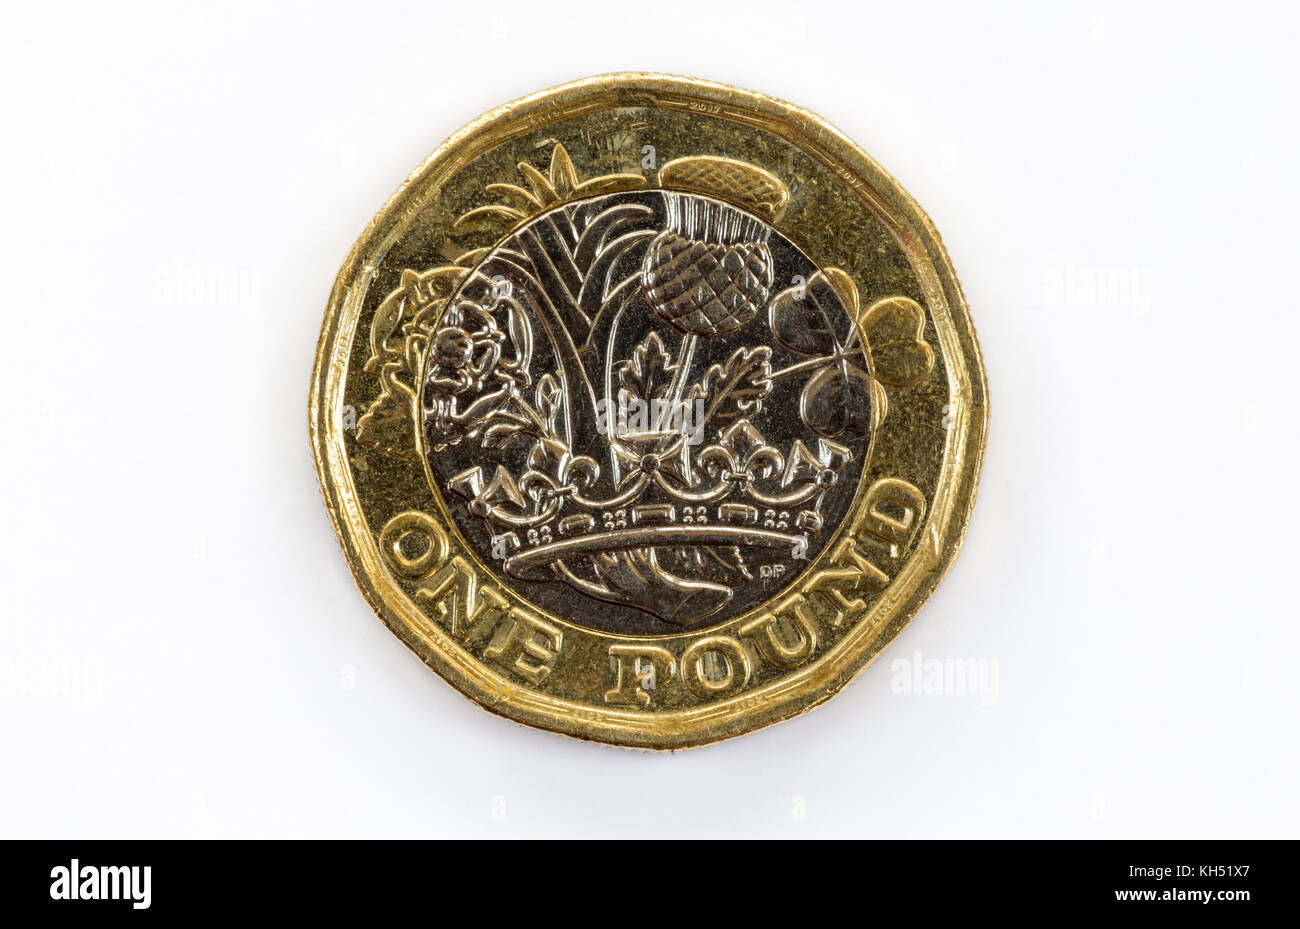 New one pound coin. Stock Photo